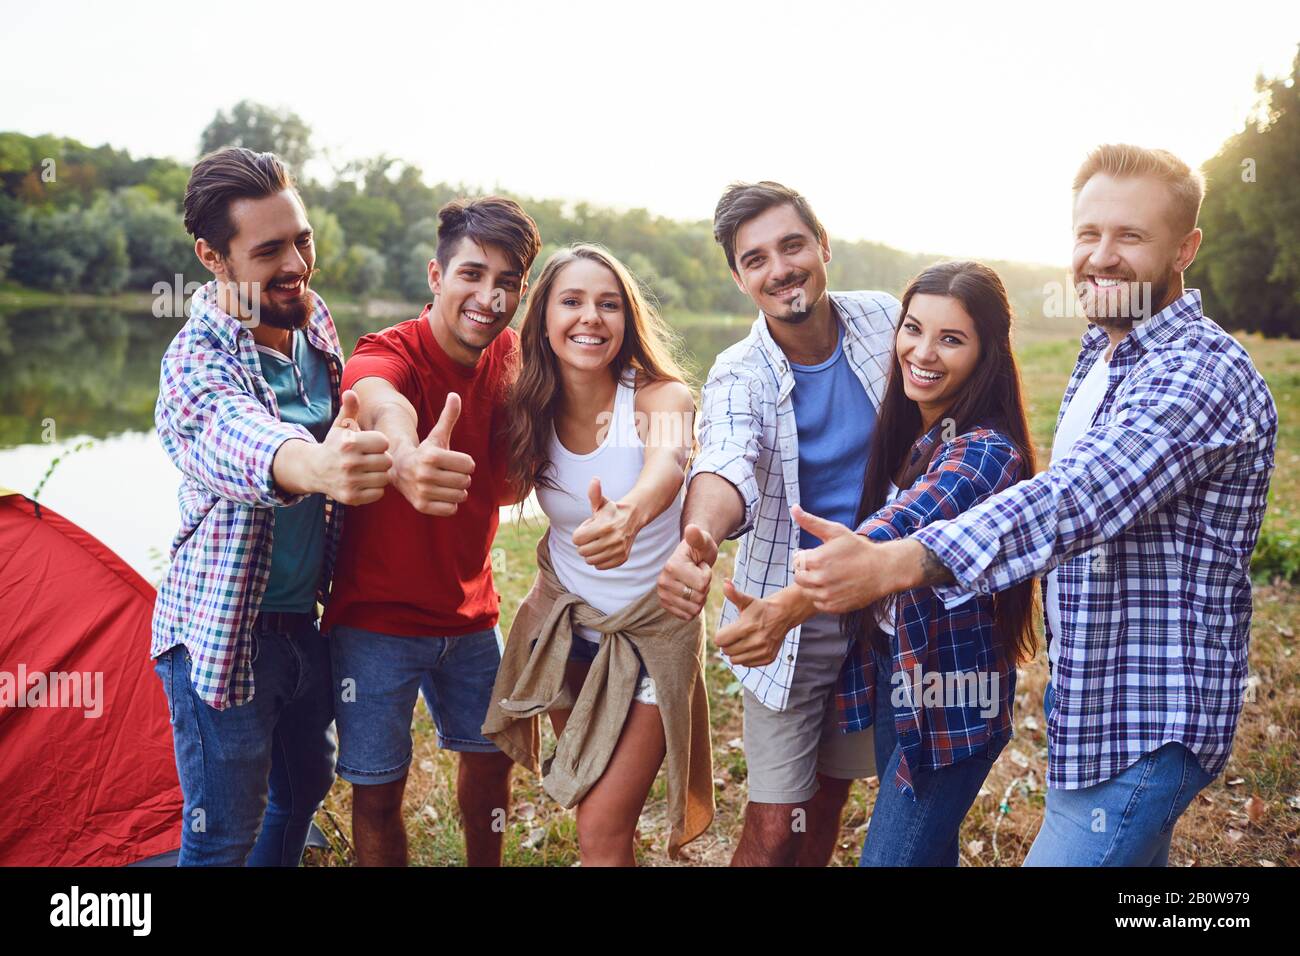 Group of people smiling standing on a picnic Stock Photo